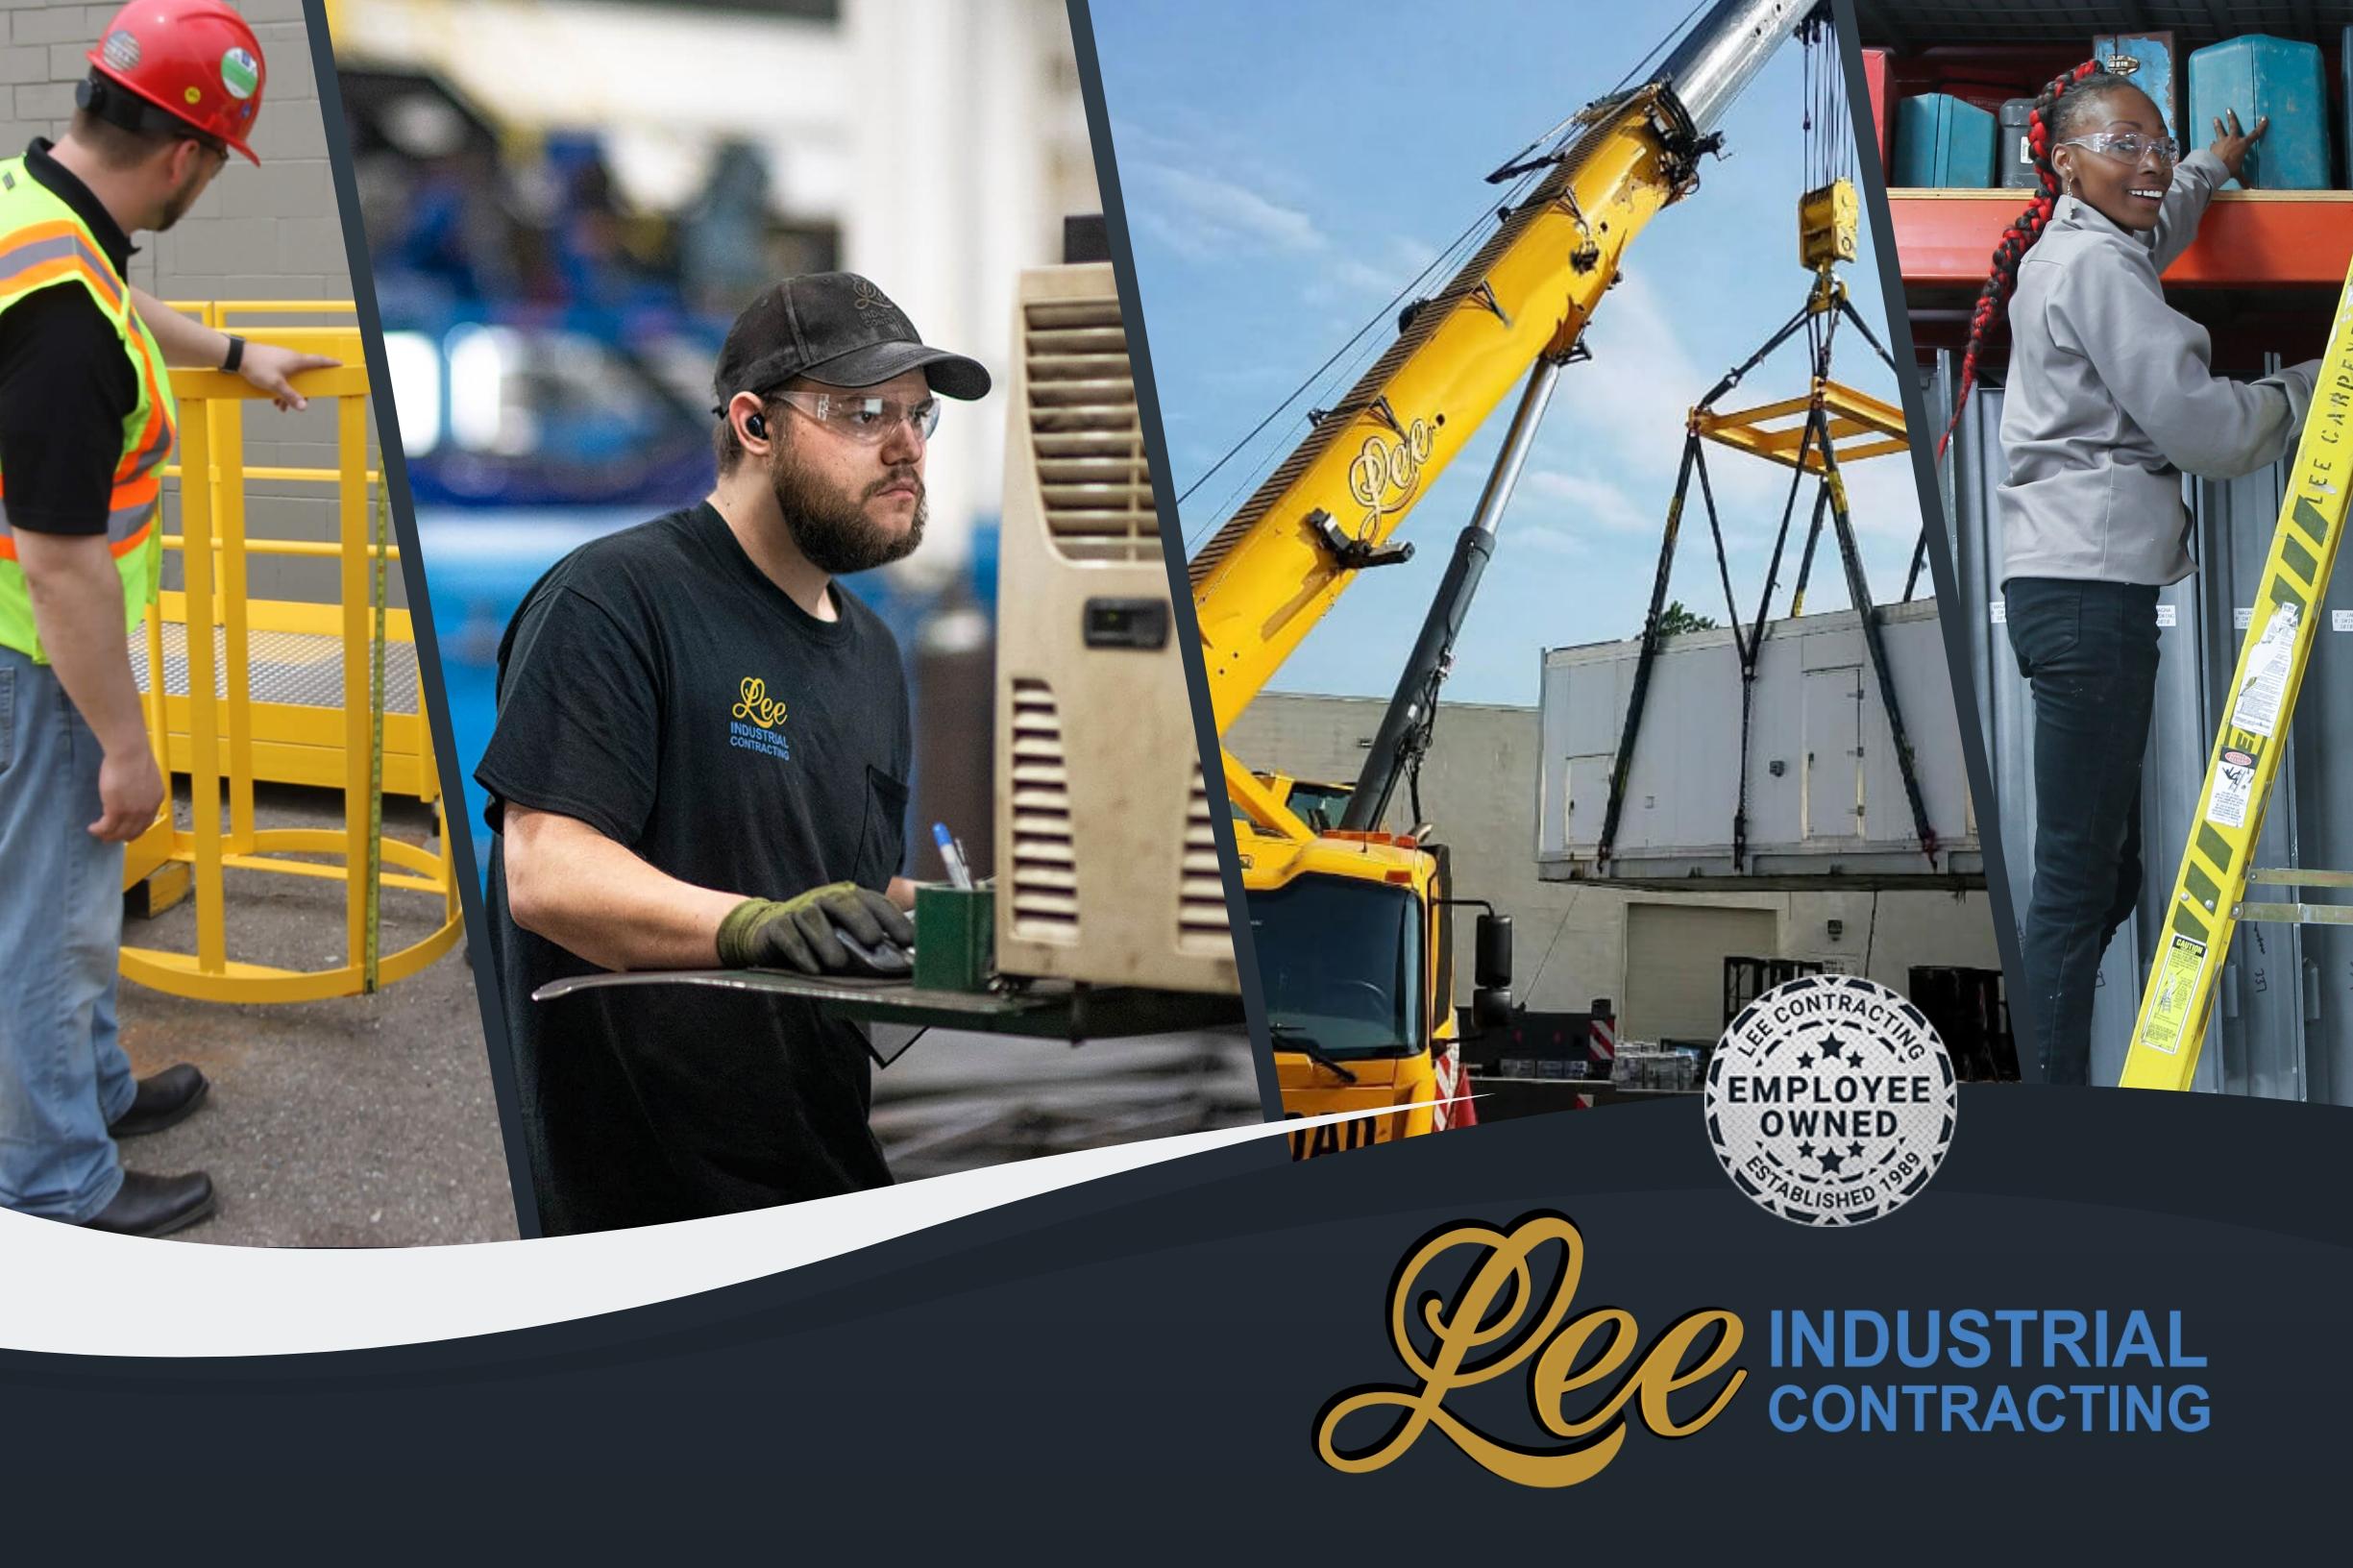 At Lee Contracting, There is everyday excellence